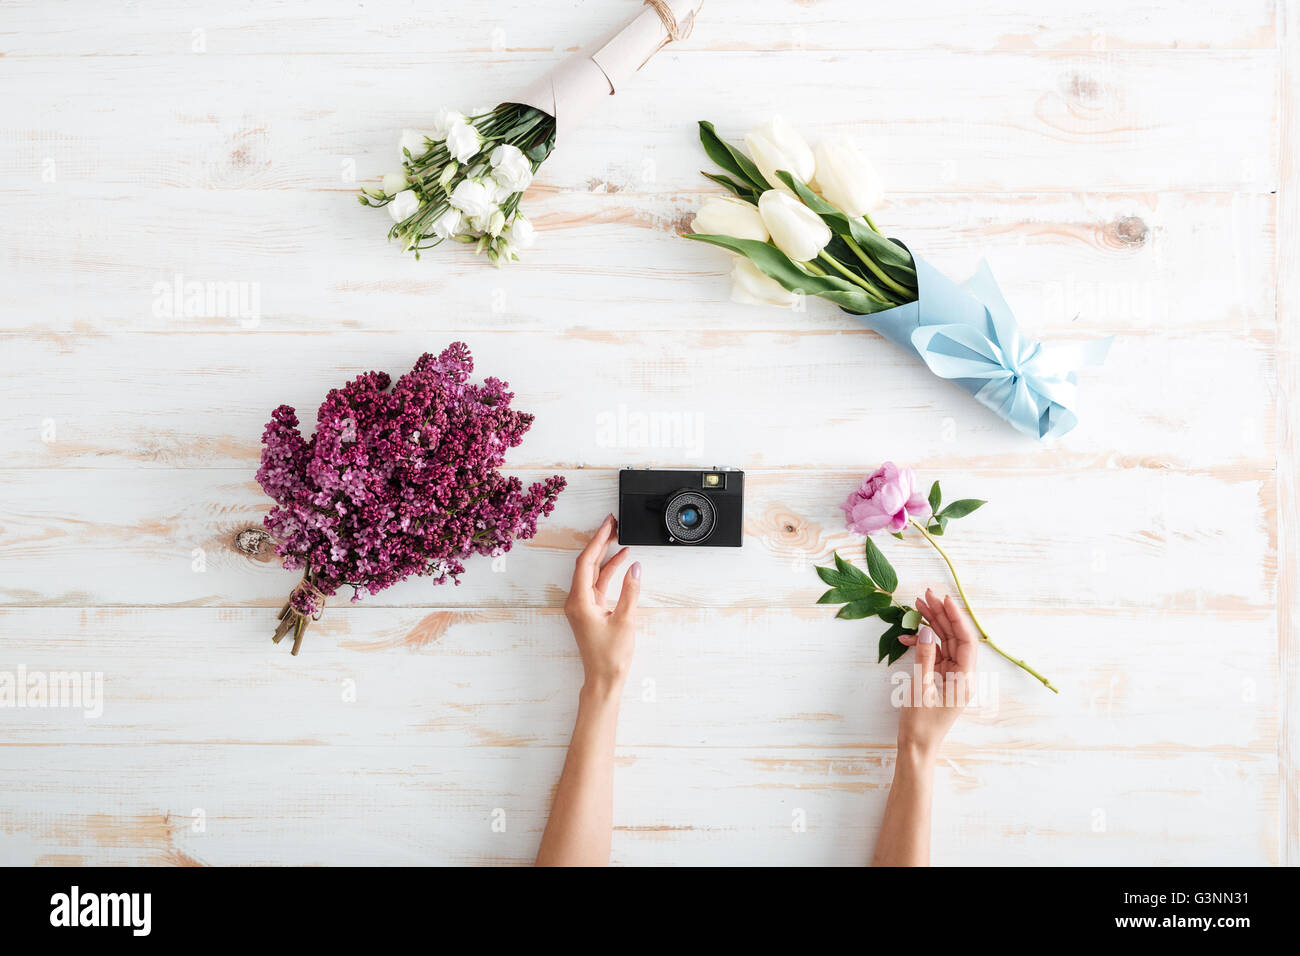 Hands of young woman put flower bouquets and photo camera on wooden table Stock Photo